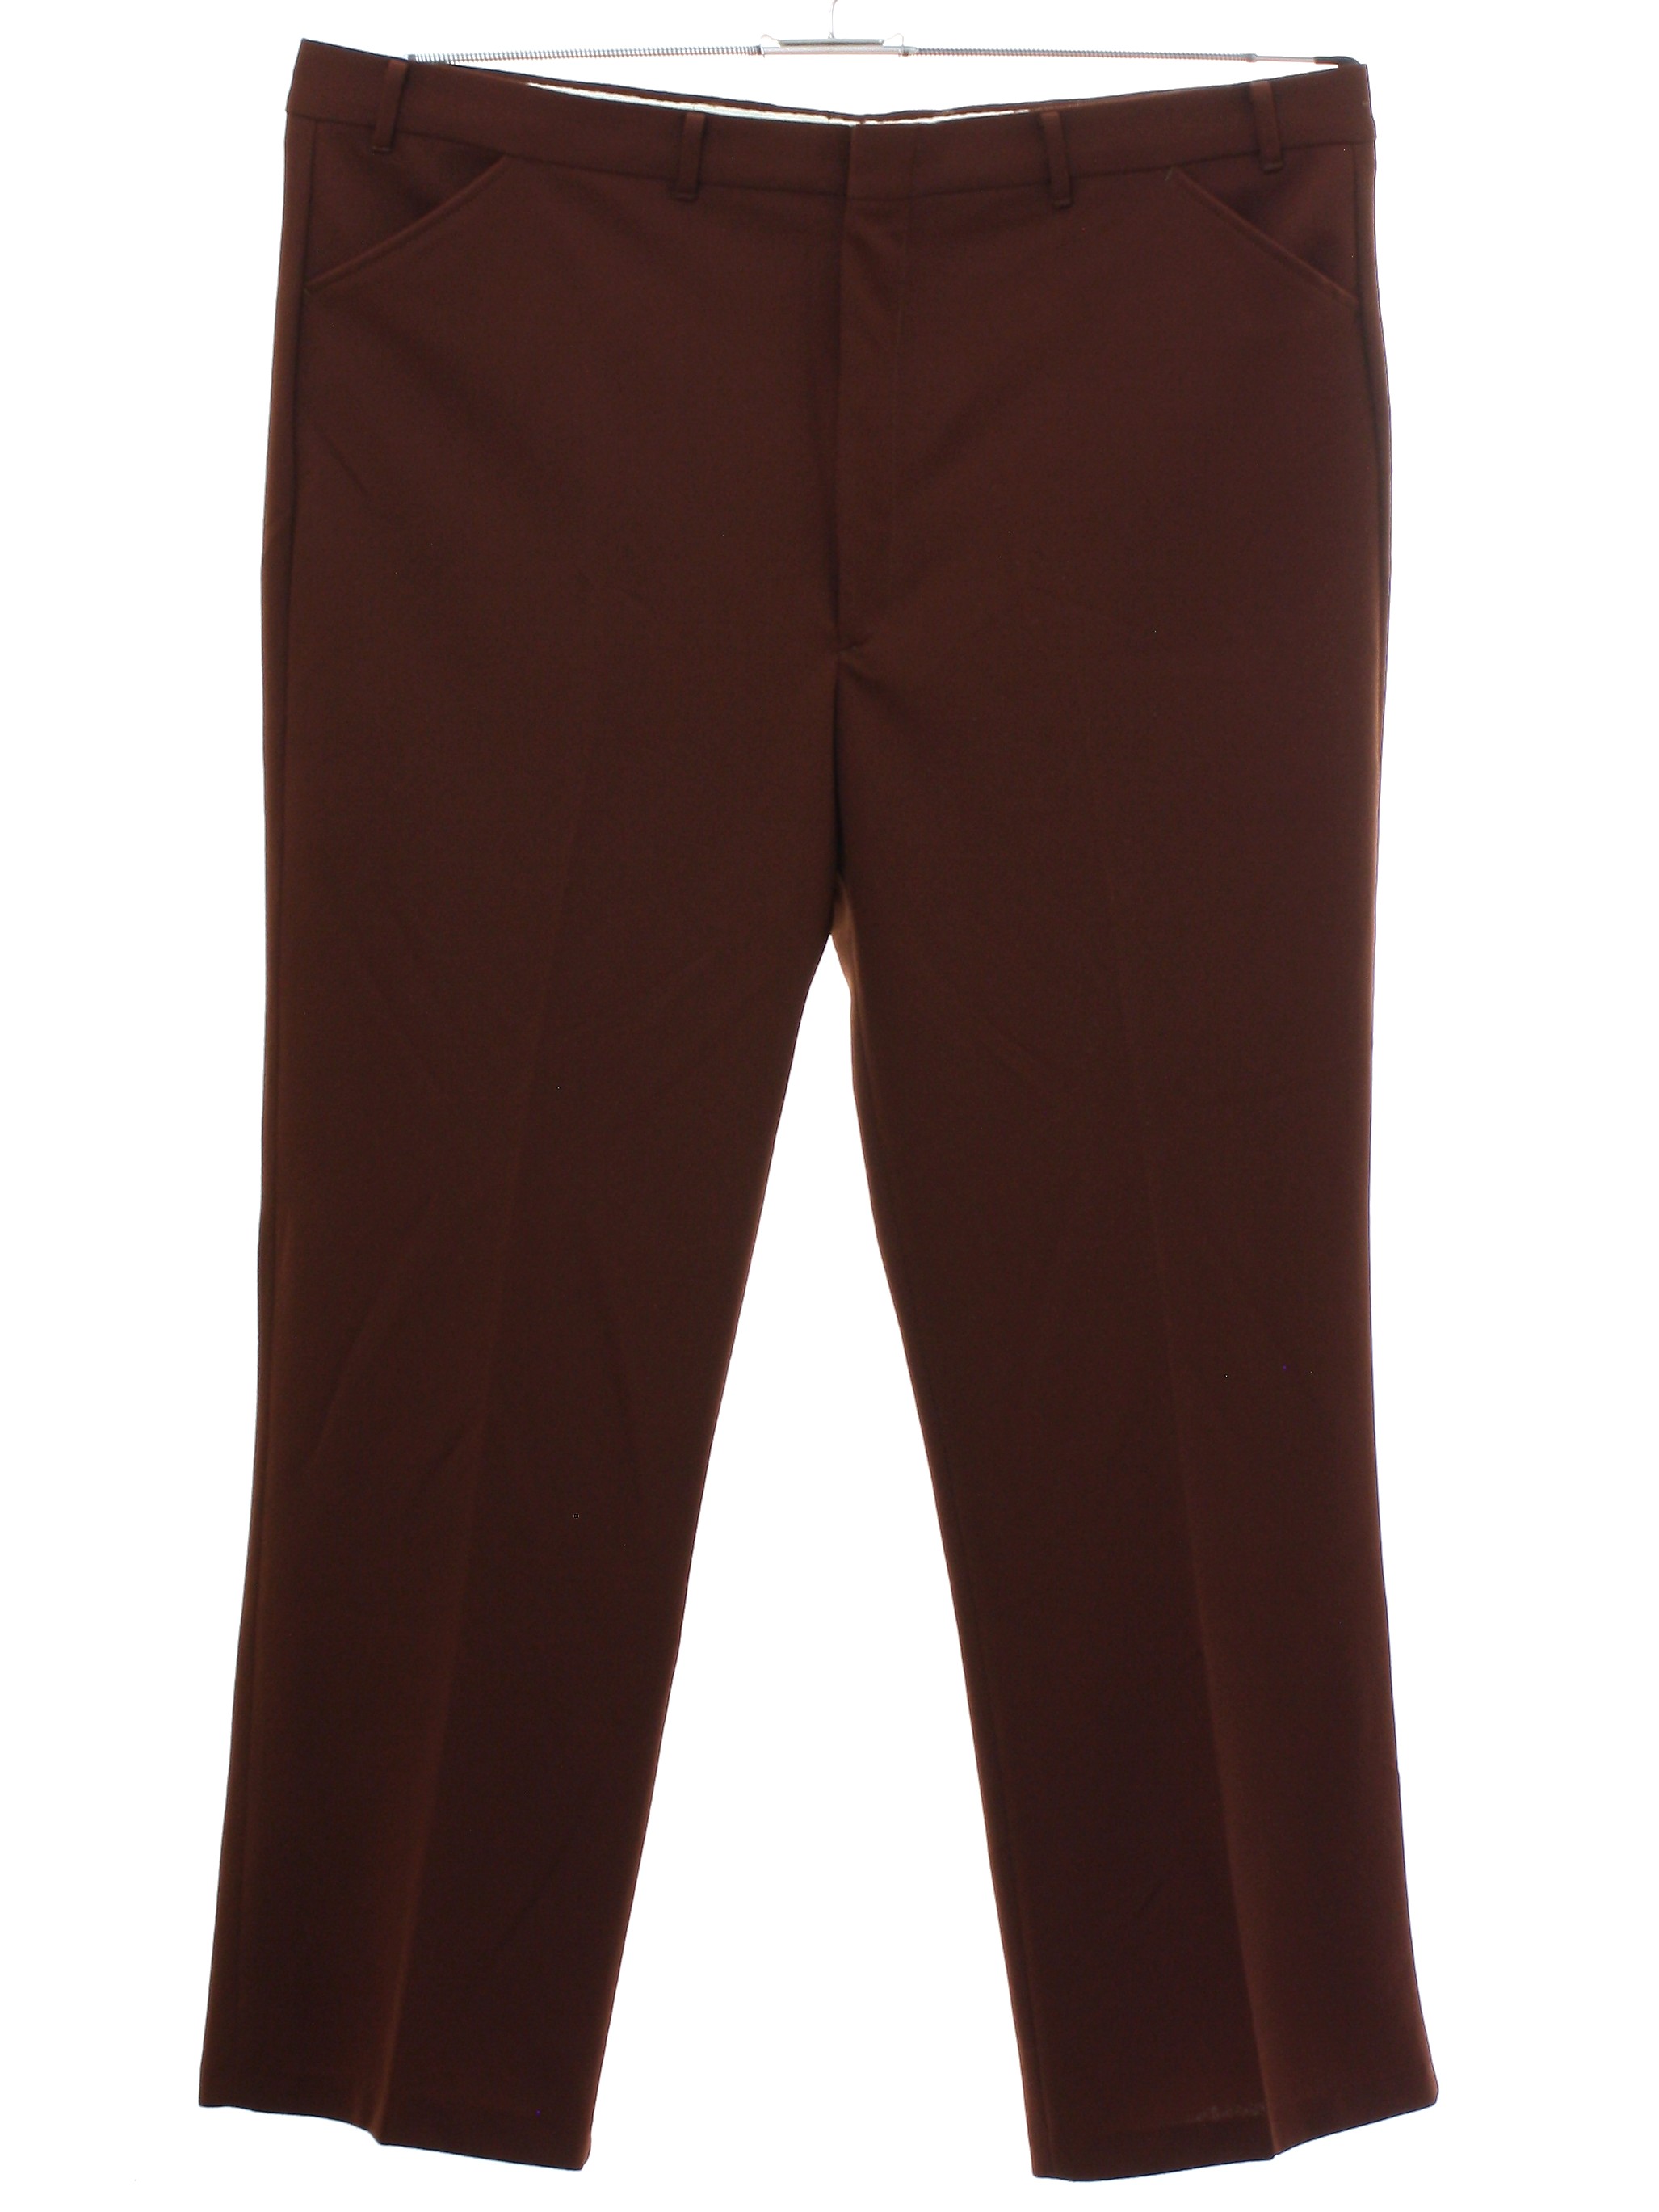 Retro 70's Pants: 70s -Haband- Mens cinnamon spice brown polyester knit ...